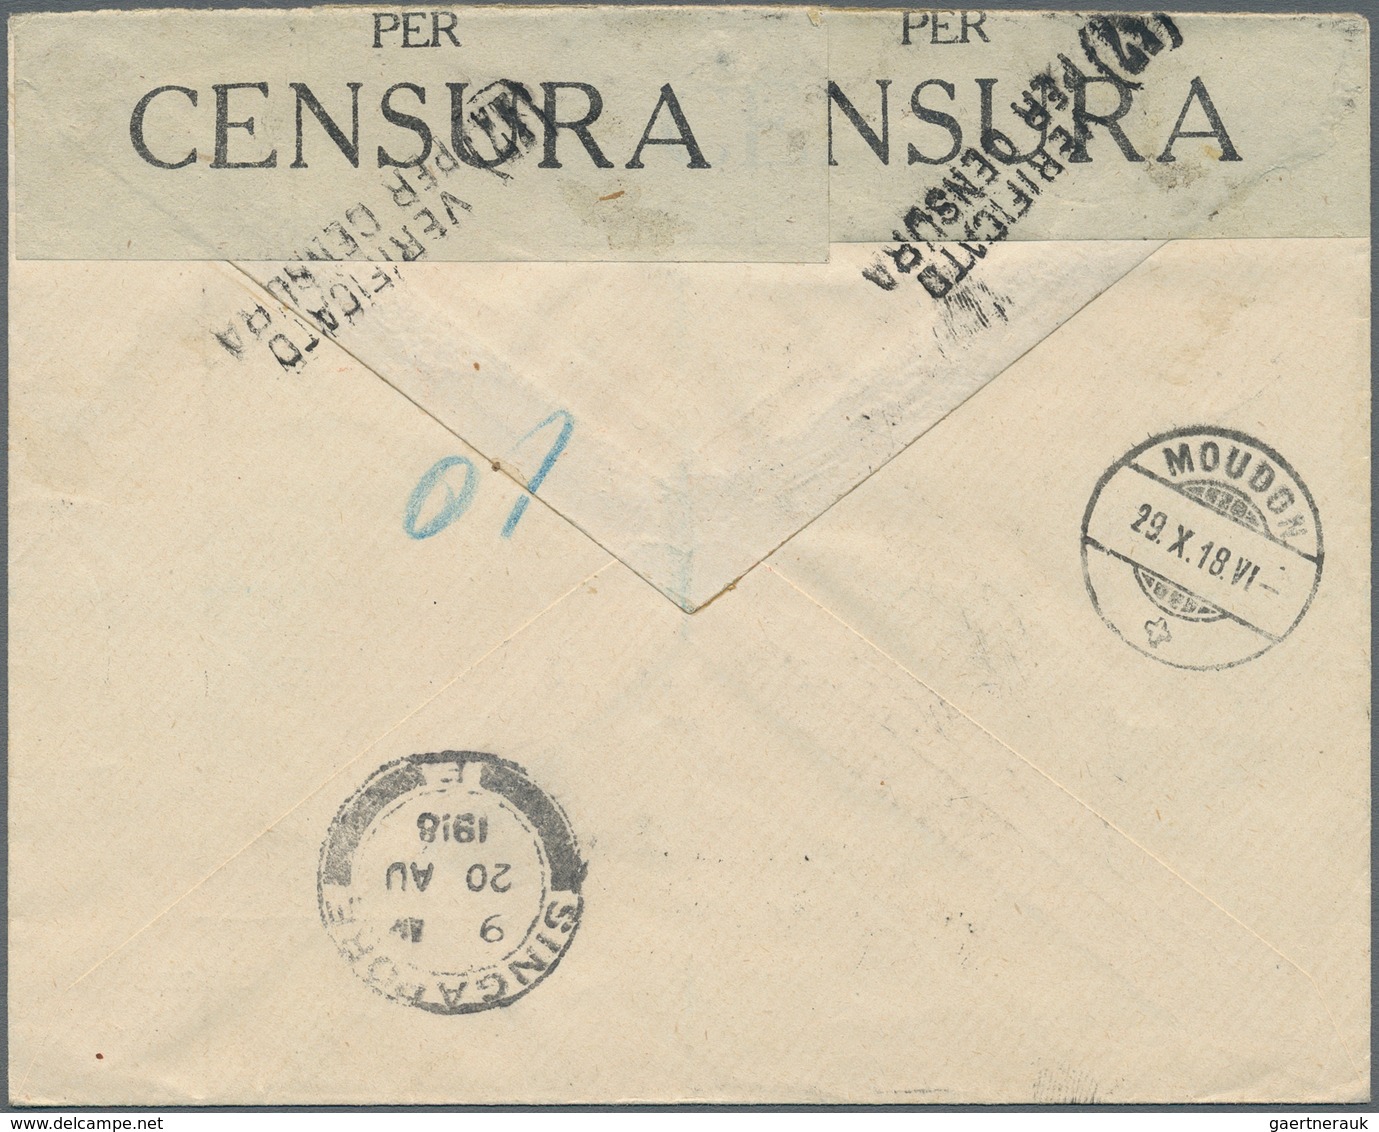 Malaiische Staaten - Johor: 1918, Registered Cover With 1 Dollar Single Frankiing From "JOHORE 19 AU - Johore